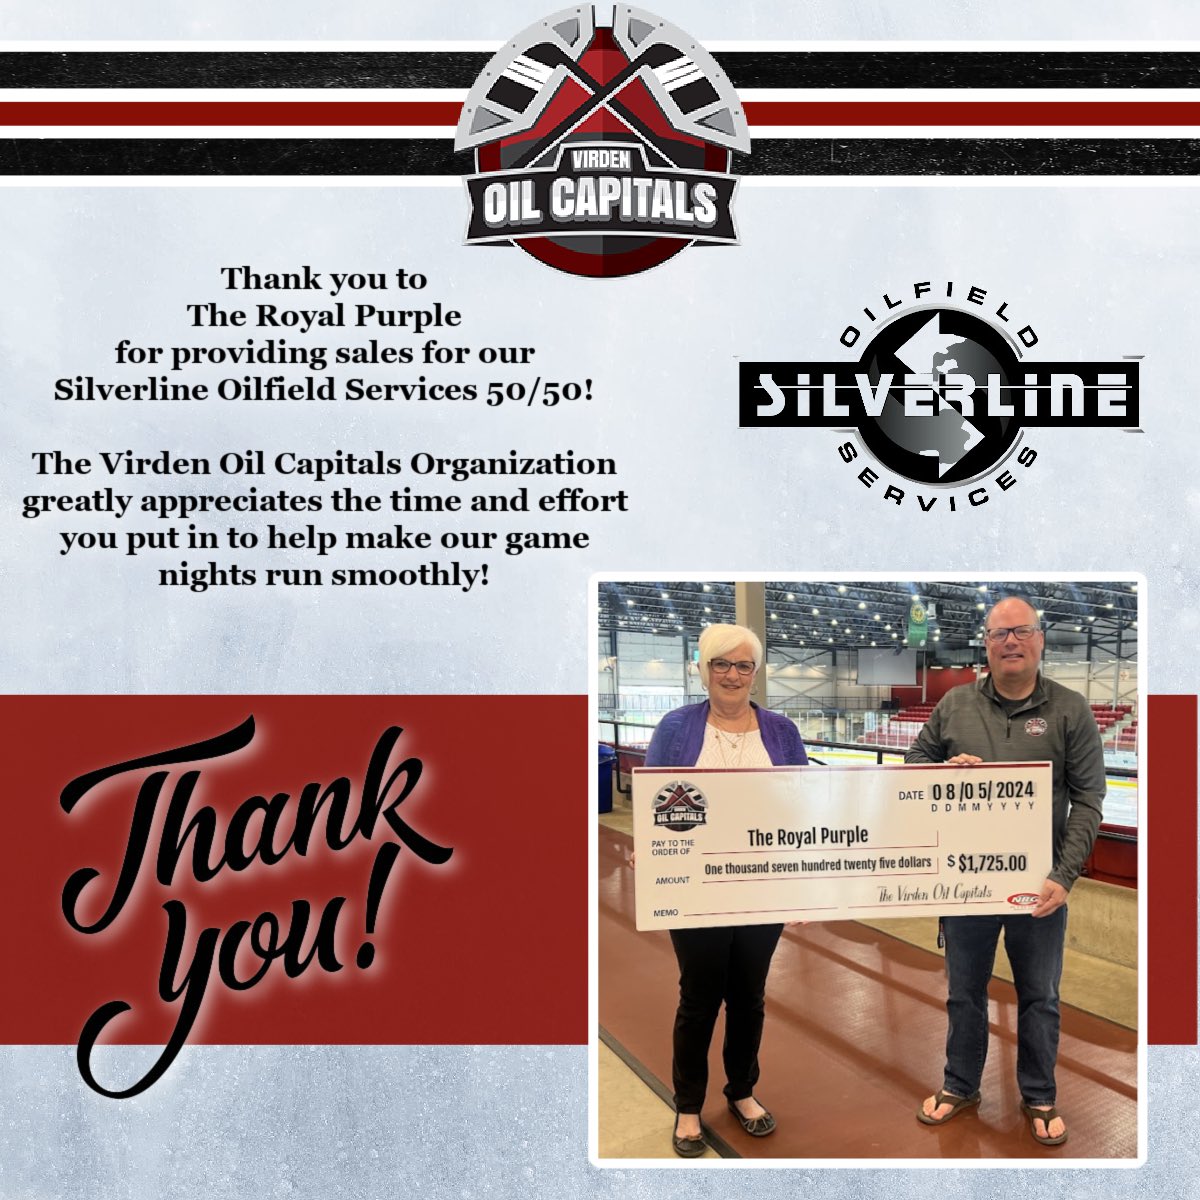 The Virden Oil Capitals would like to thank the Virden Royal Purple Lodge 220 for selling Silverline Oilfield Services 50/50 at our home games. 

We greatly appreciate your dedication to the community and all the work you do!